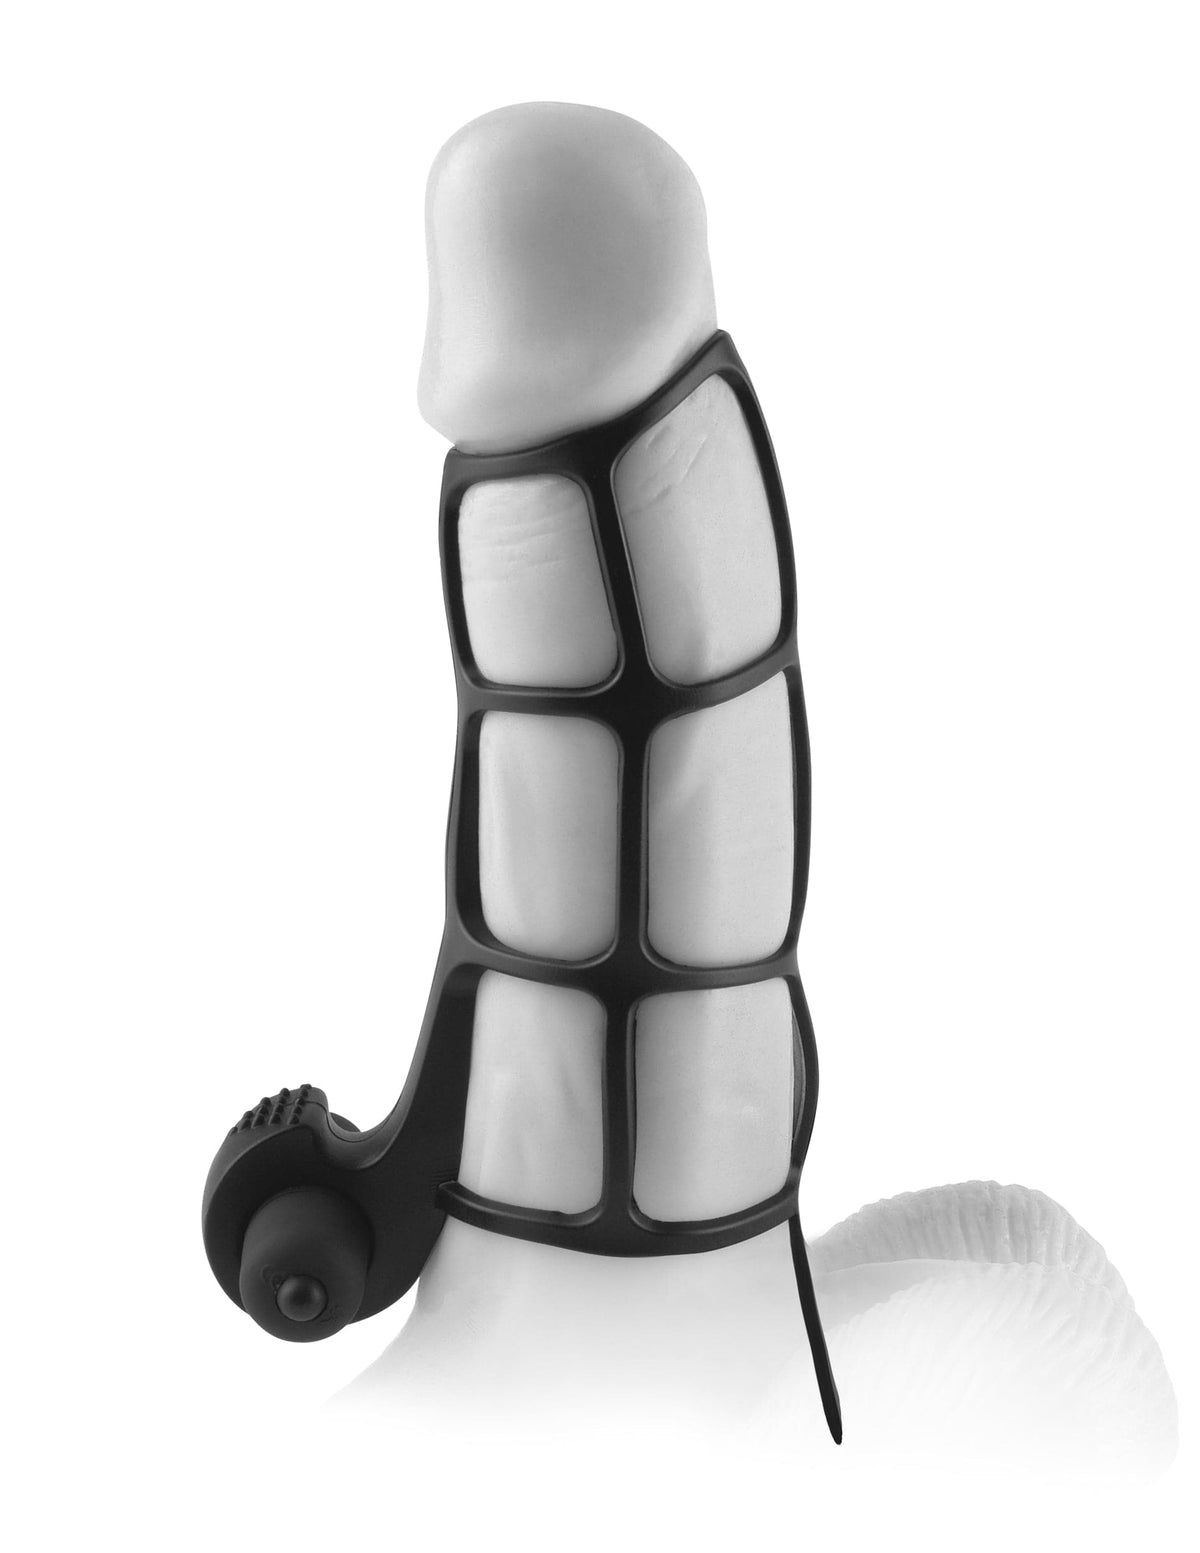 fantasy x tensions deluxe silicone power cage black